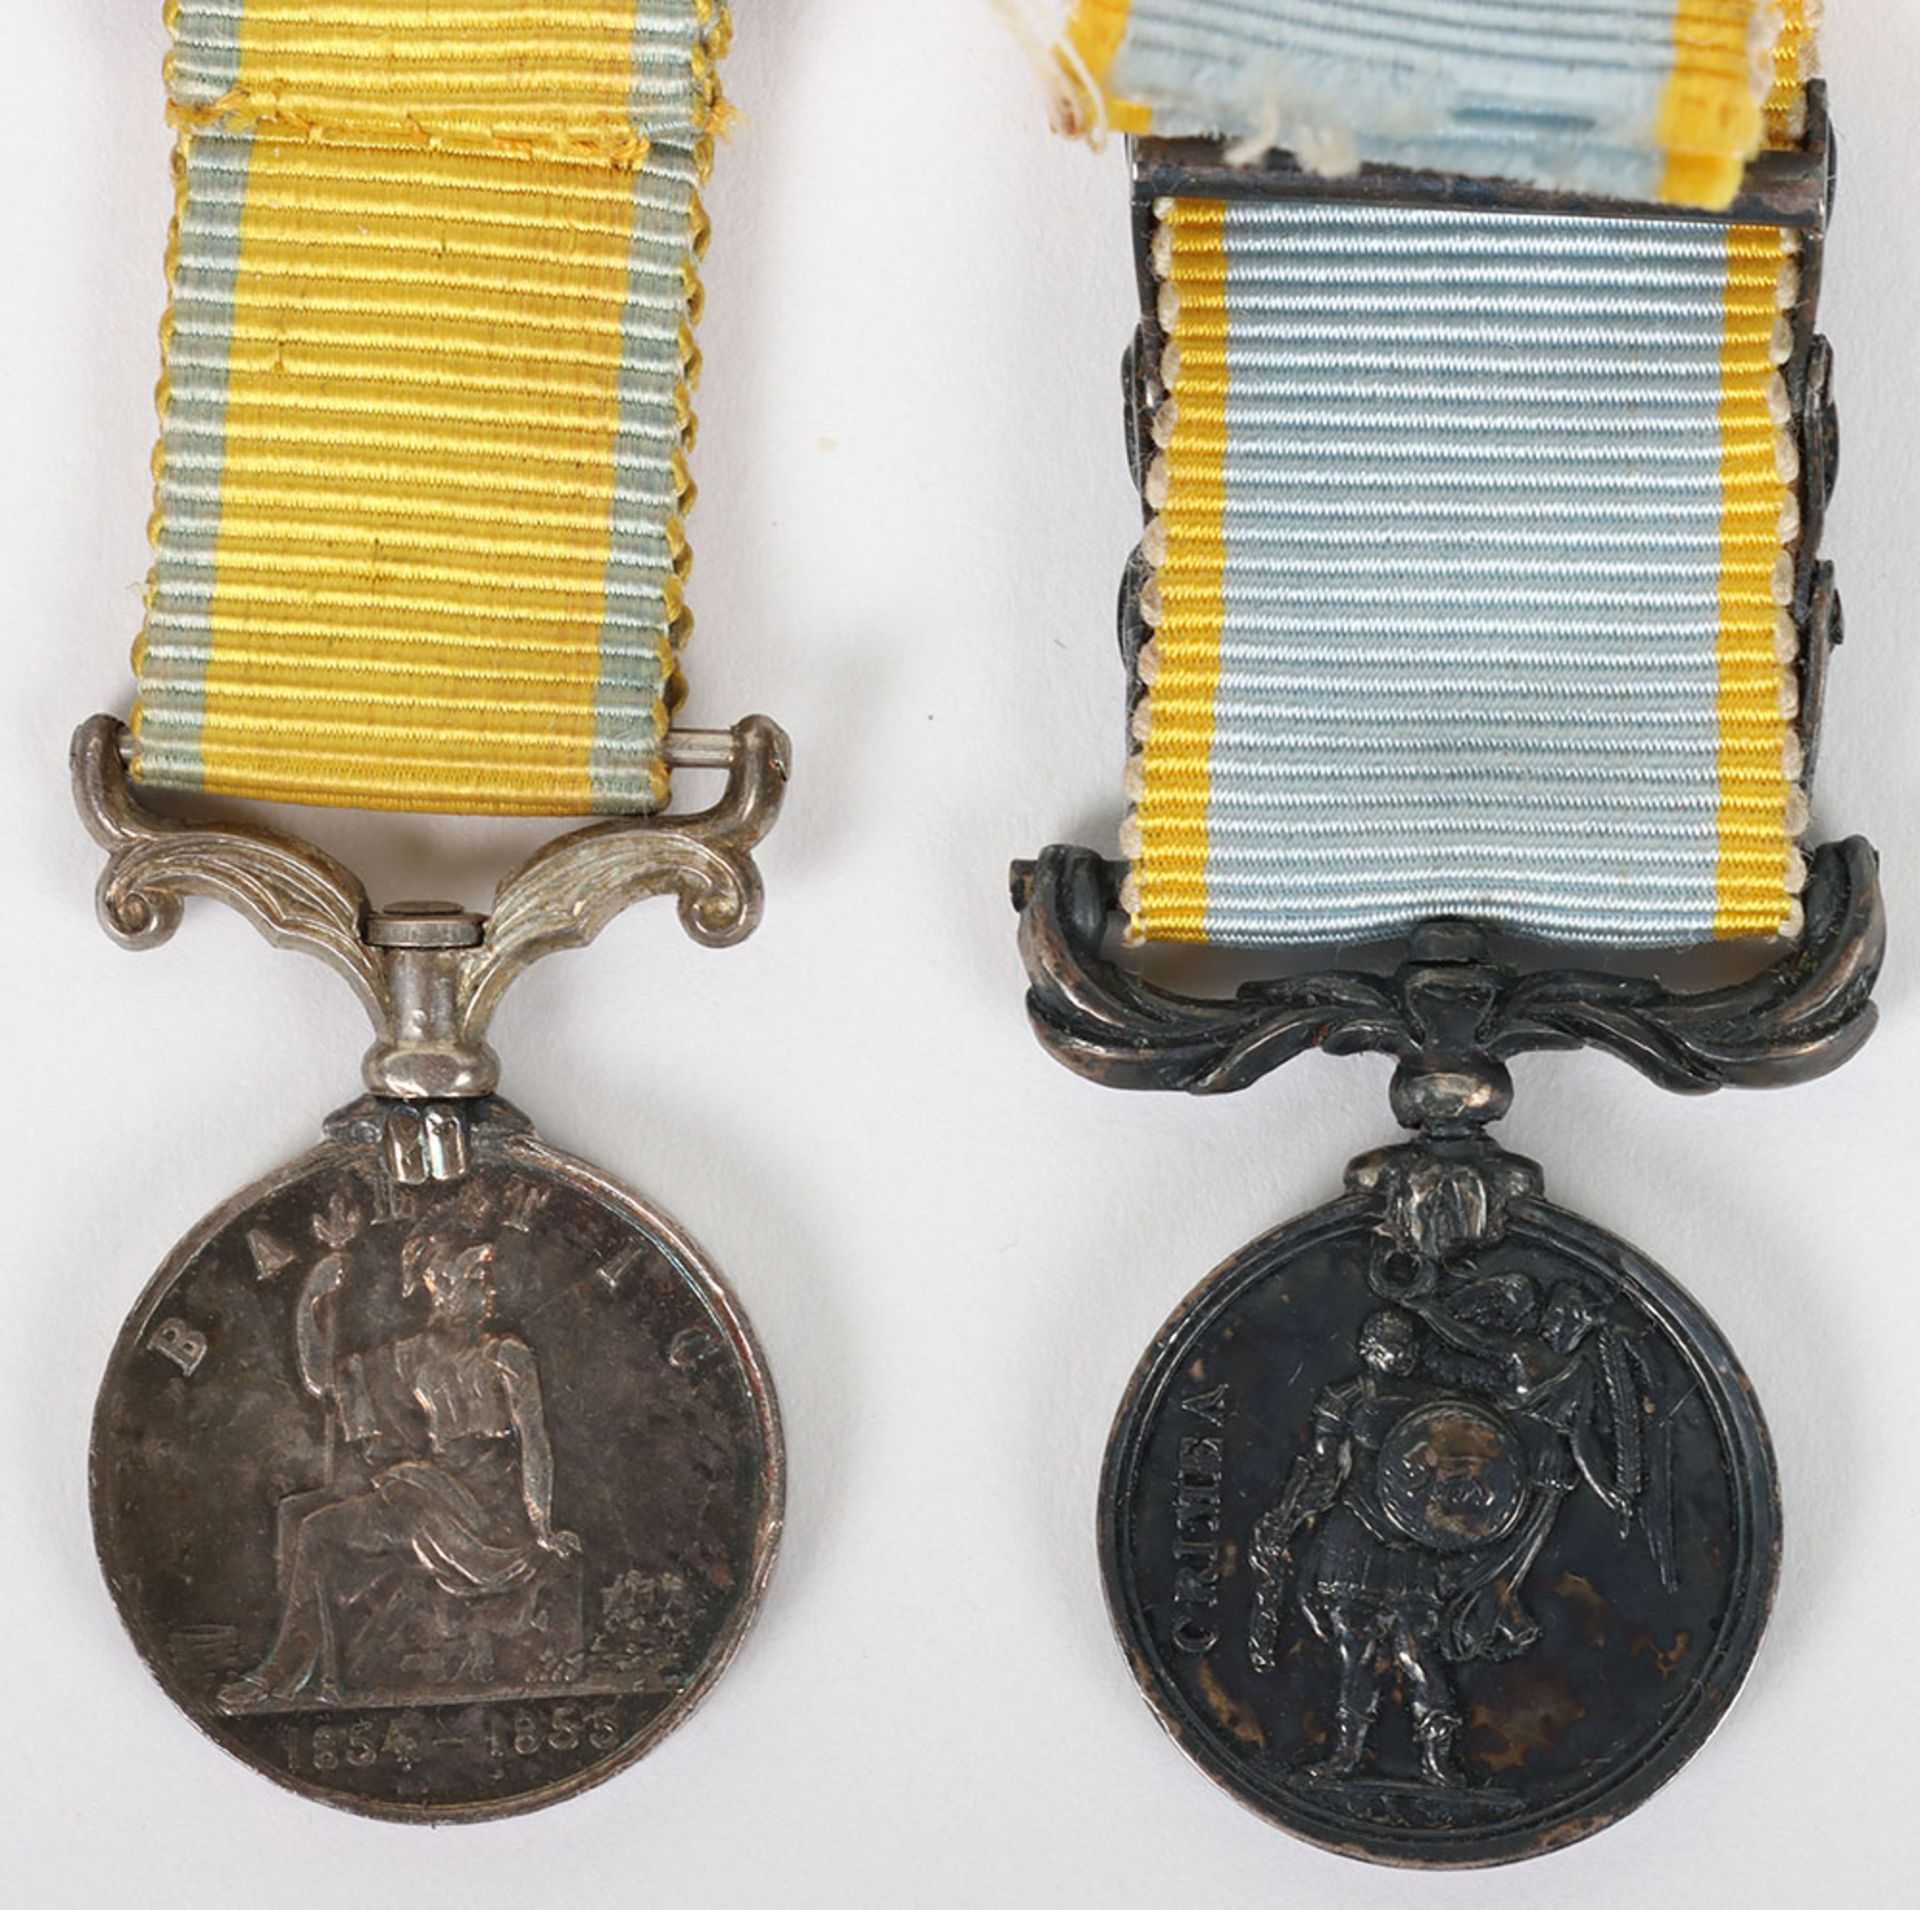 Collection of 5 Contemporary Victorian Miniature Medals for Service in the Crimea and the Baltic - Image 7 of 9